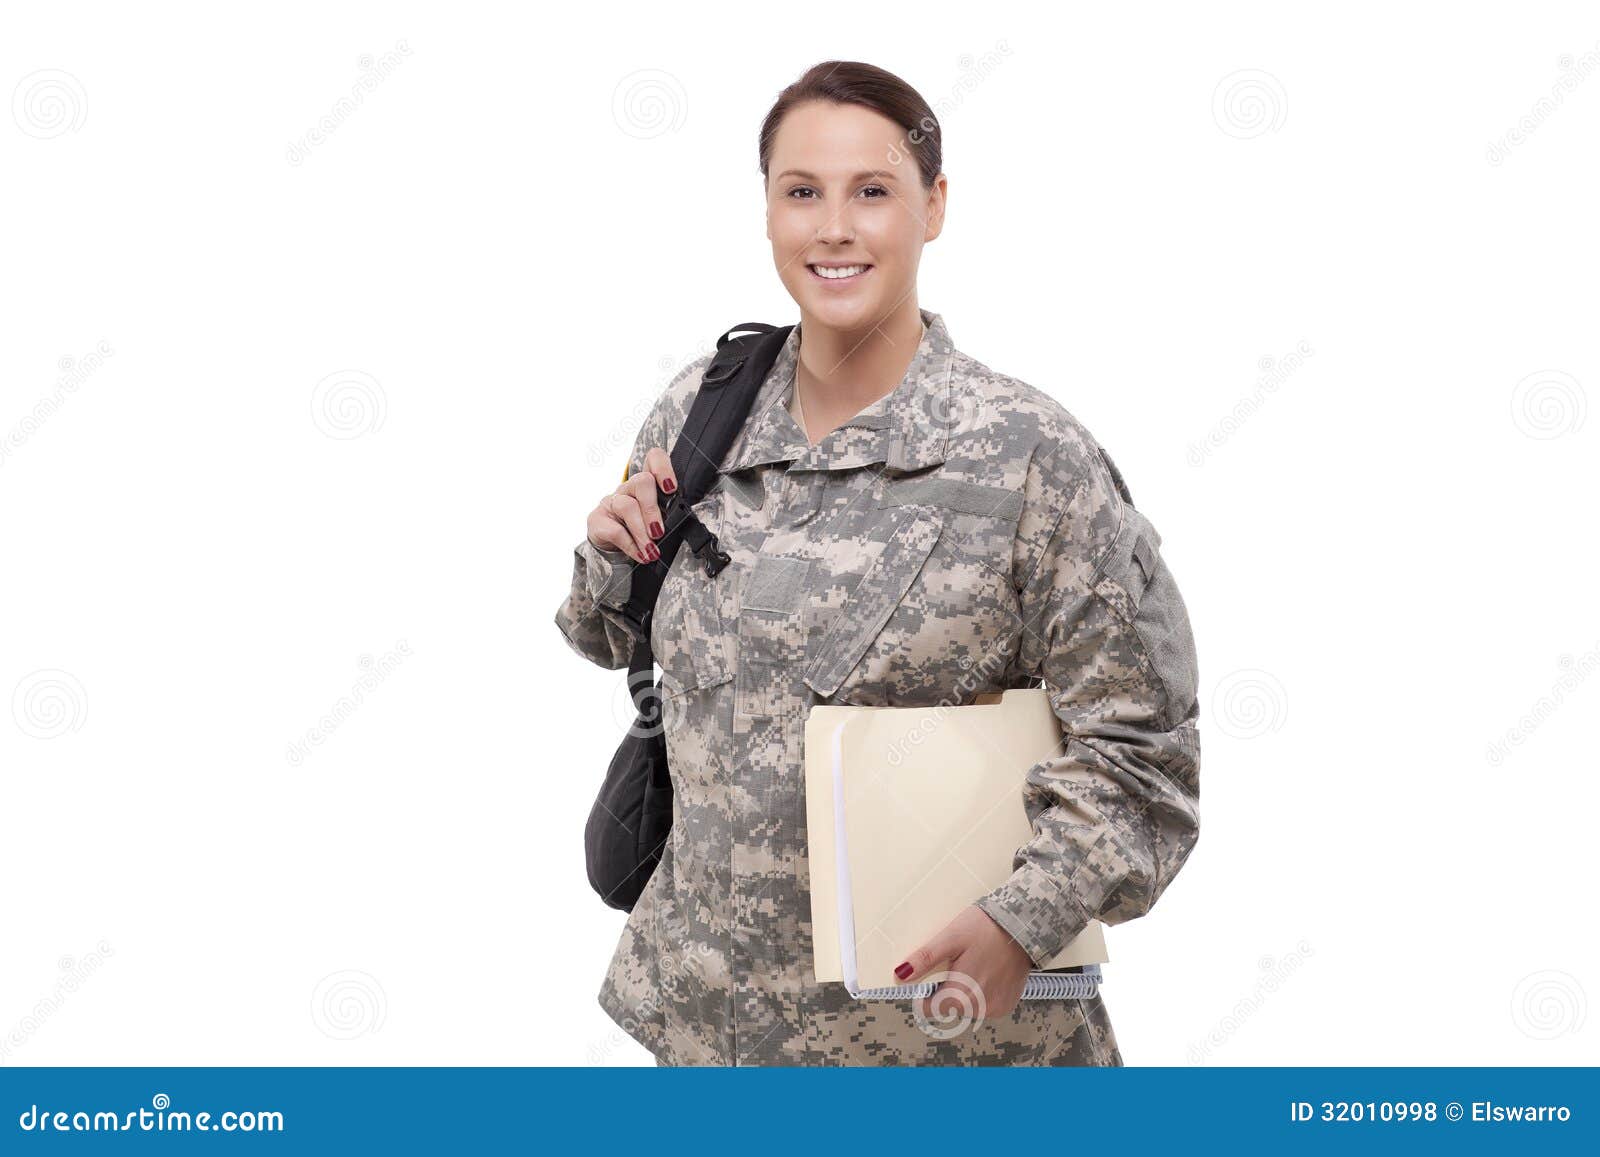 female soldier with documents and backpack